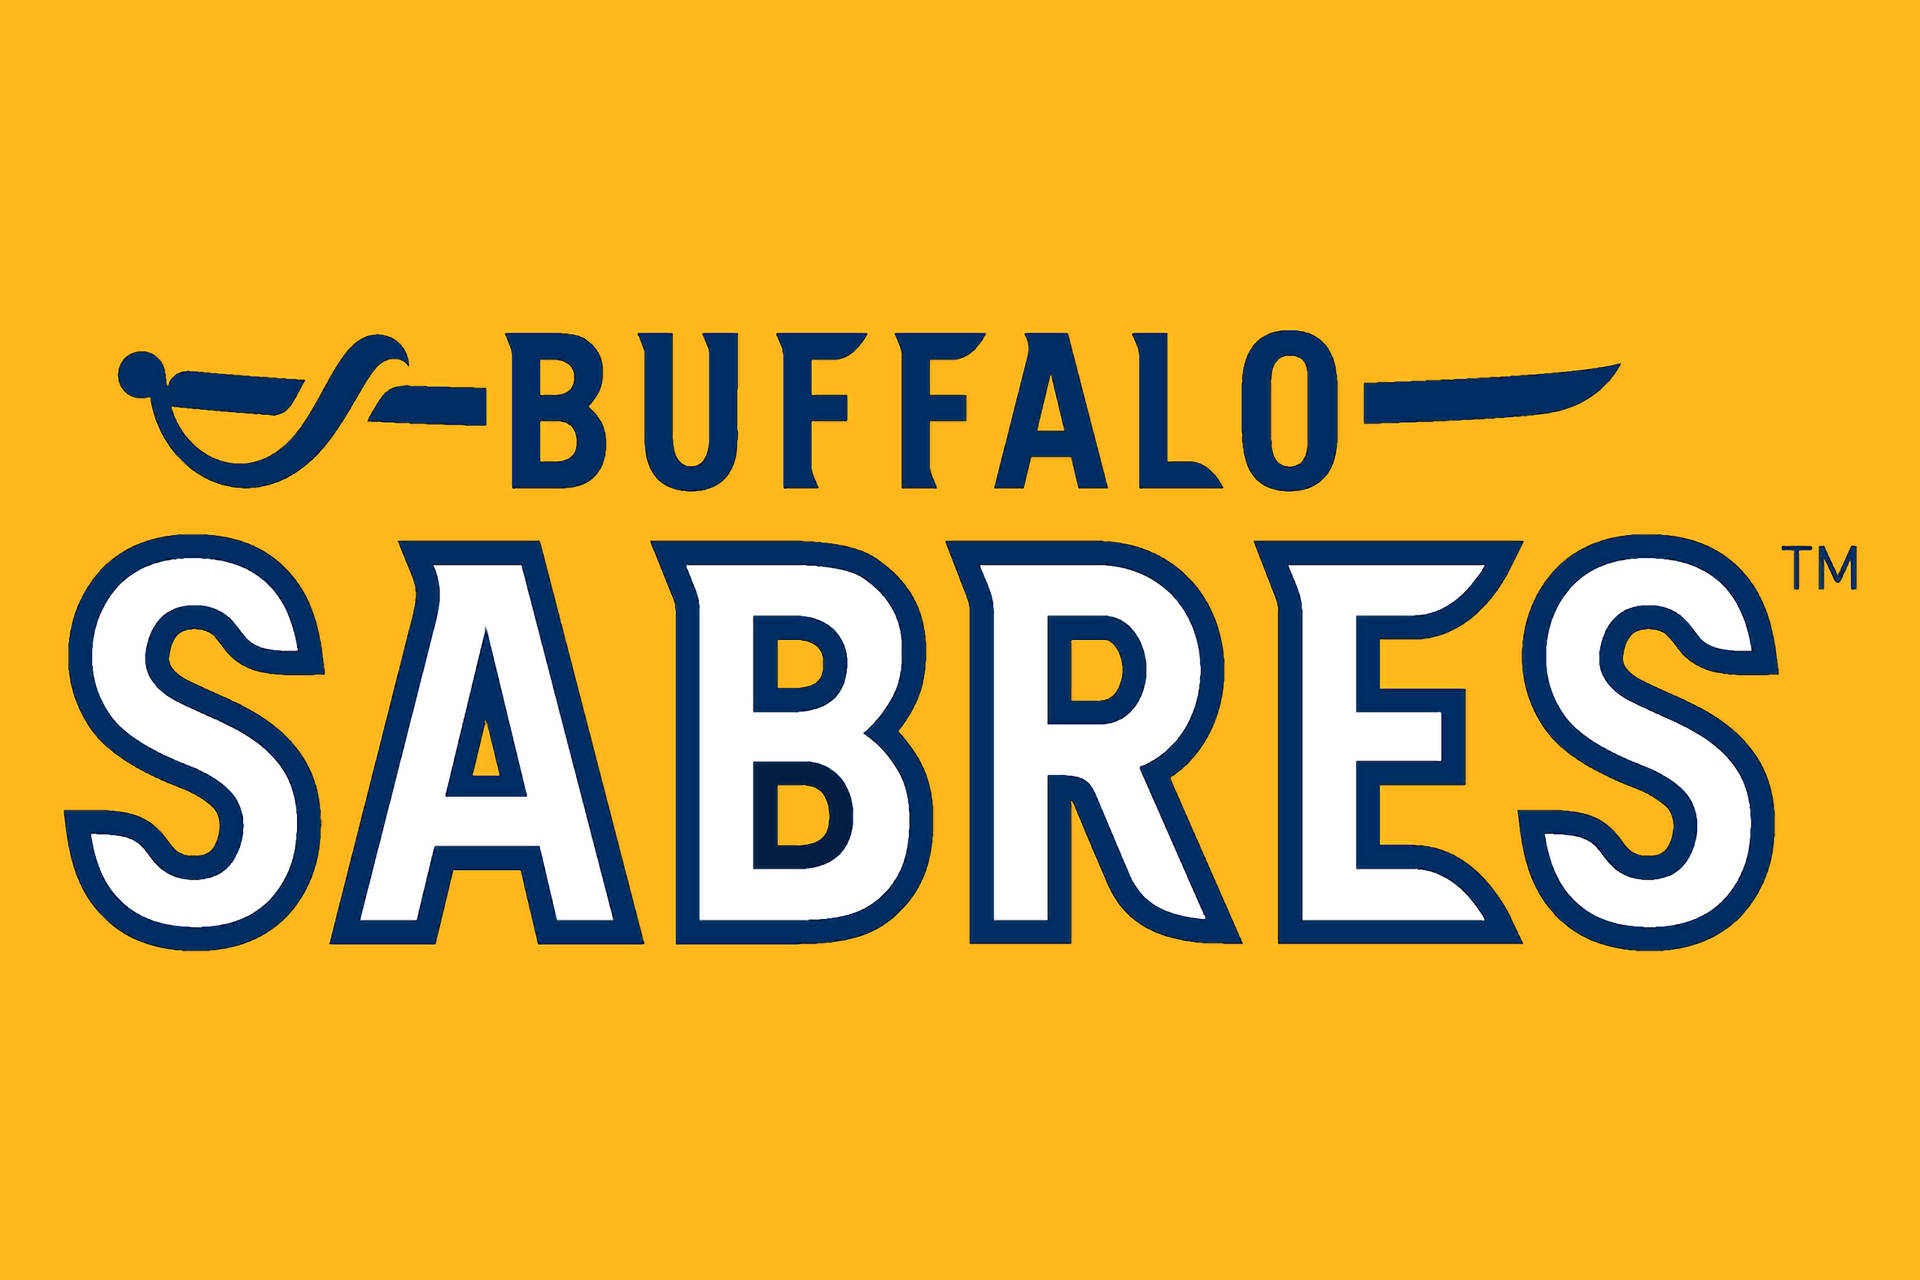 Buffalo Sabres Yellow Text Background